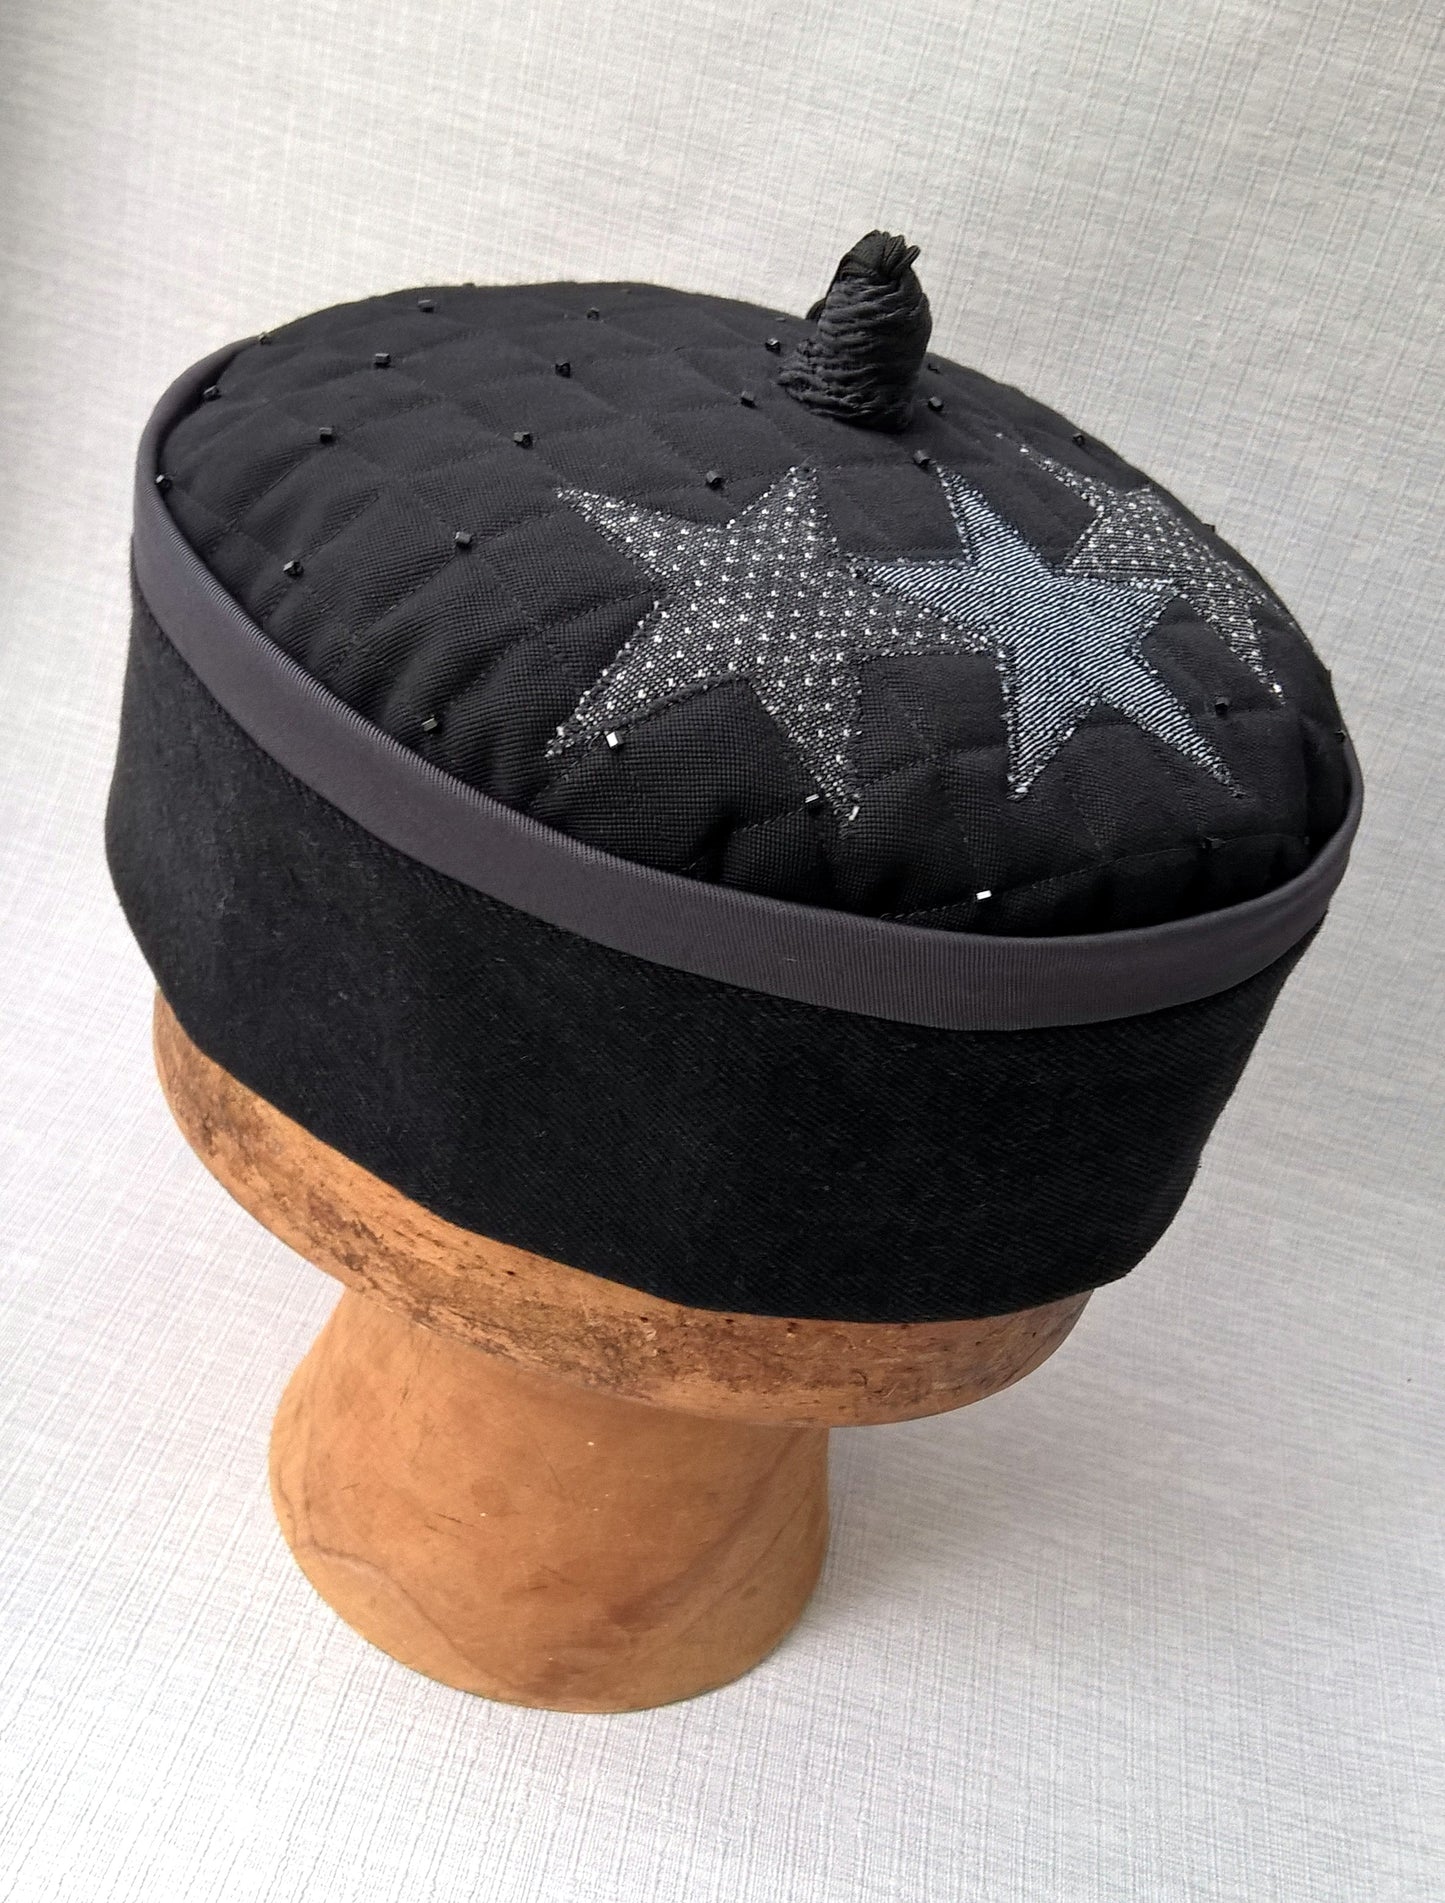 Wizards tassel smoking cap in black and grey with applique stars